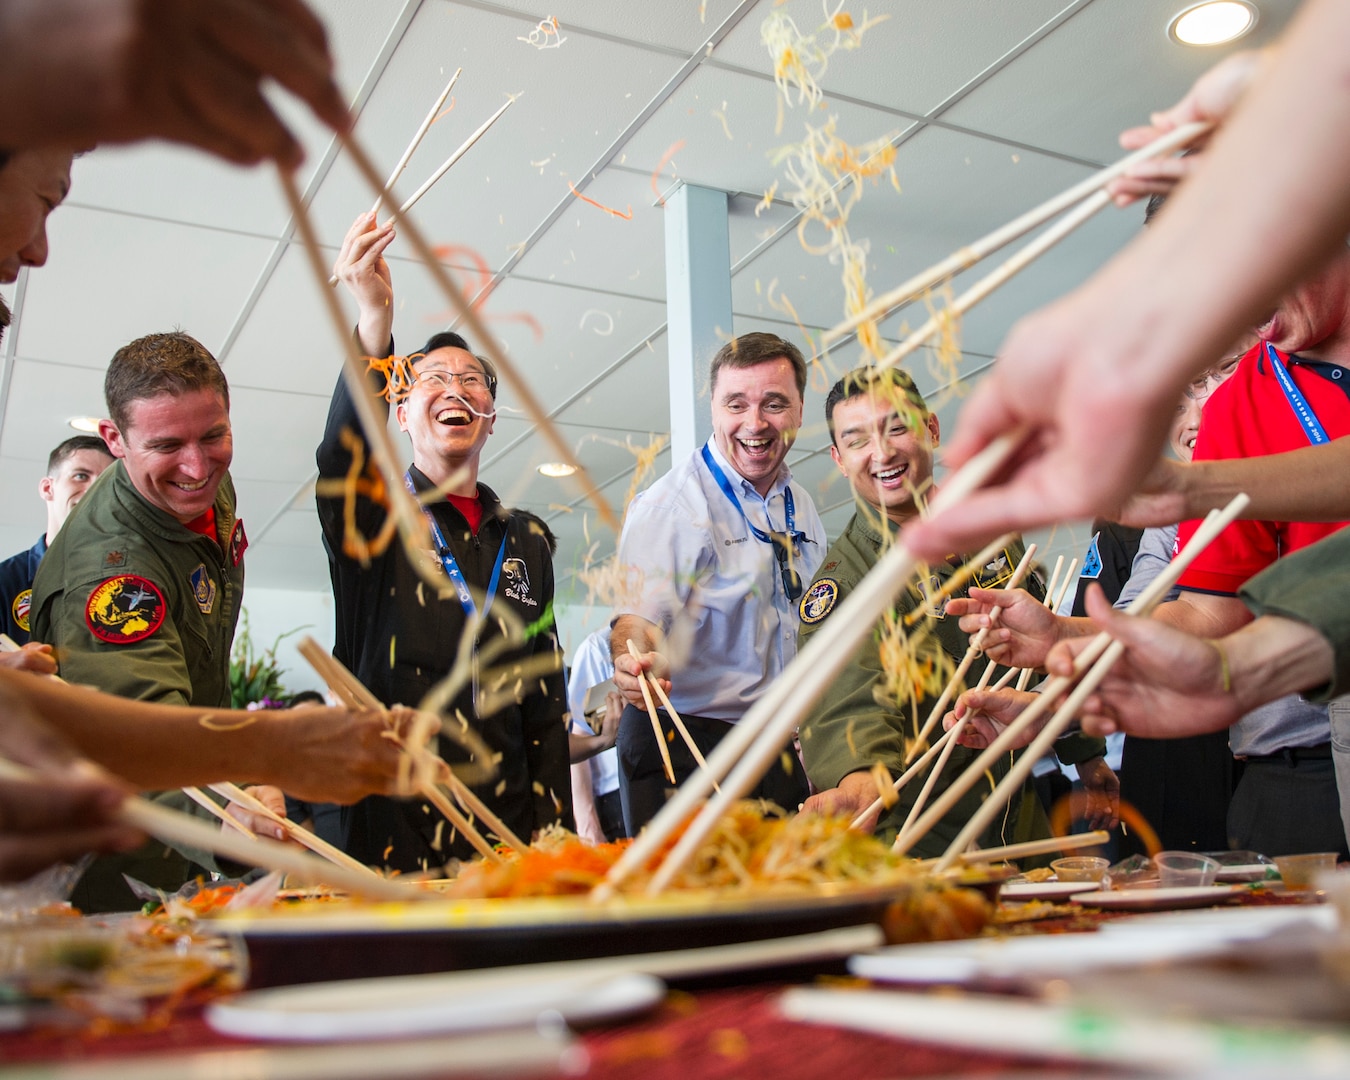 Aerial demonstration team members from the U.S., Singapore, Republic of Korea, Malaysia and France partake in the Lunar New Year tradition of a “Lo Hei” salad toss during a patch exchange ceremony prior to the Singapore International Airshow, at Changi Airport, Singapore, Feb. 14, 2016. The custom is meant to bring good fortune for the new year and offered Airmen from several nations a fun experience to launch them into the airshow. The Singapore International Airshow is focused on building stronger relationships between the U.S., Singapore and the international community. (U.S. Air Force photo by Capt. Raymond Geoffroy/Released)